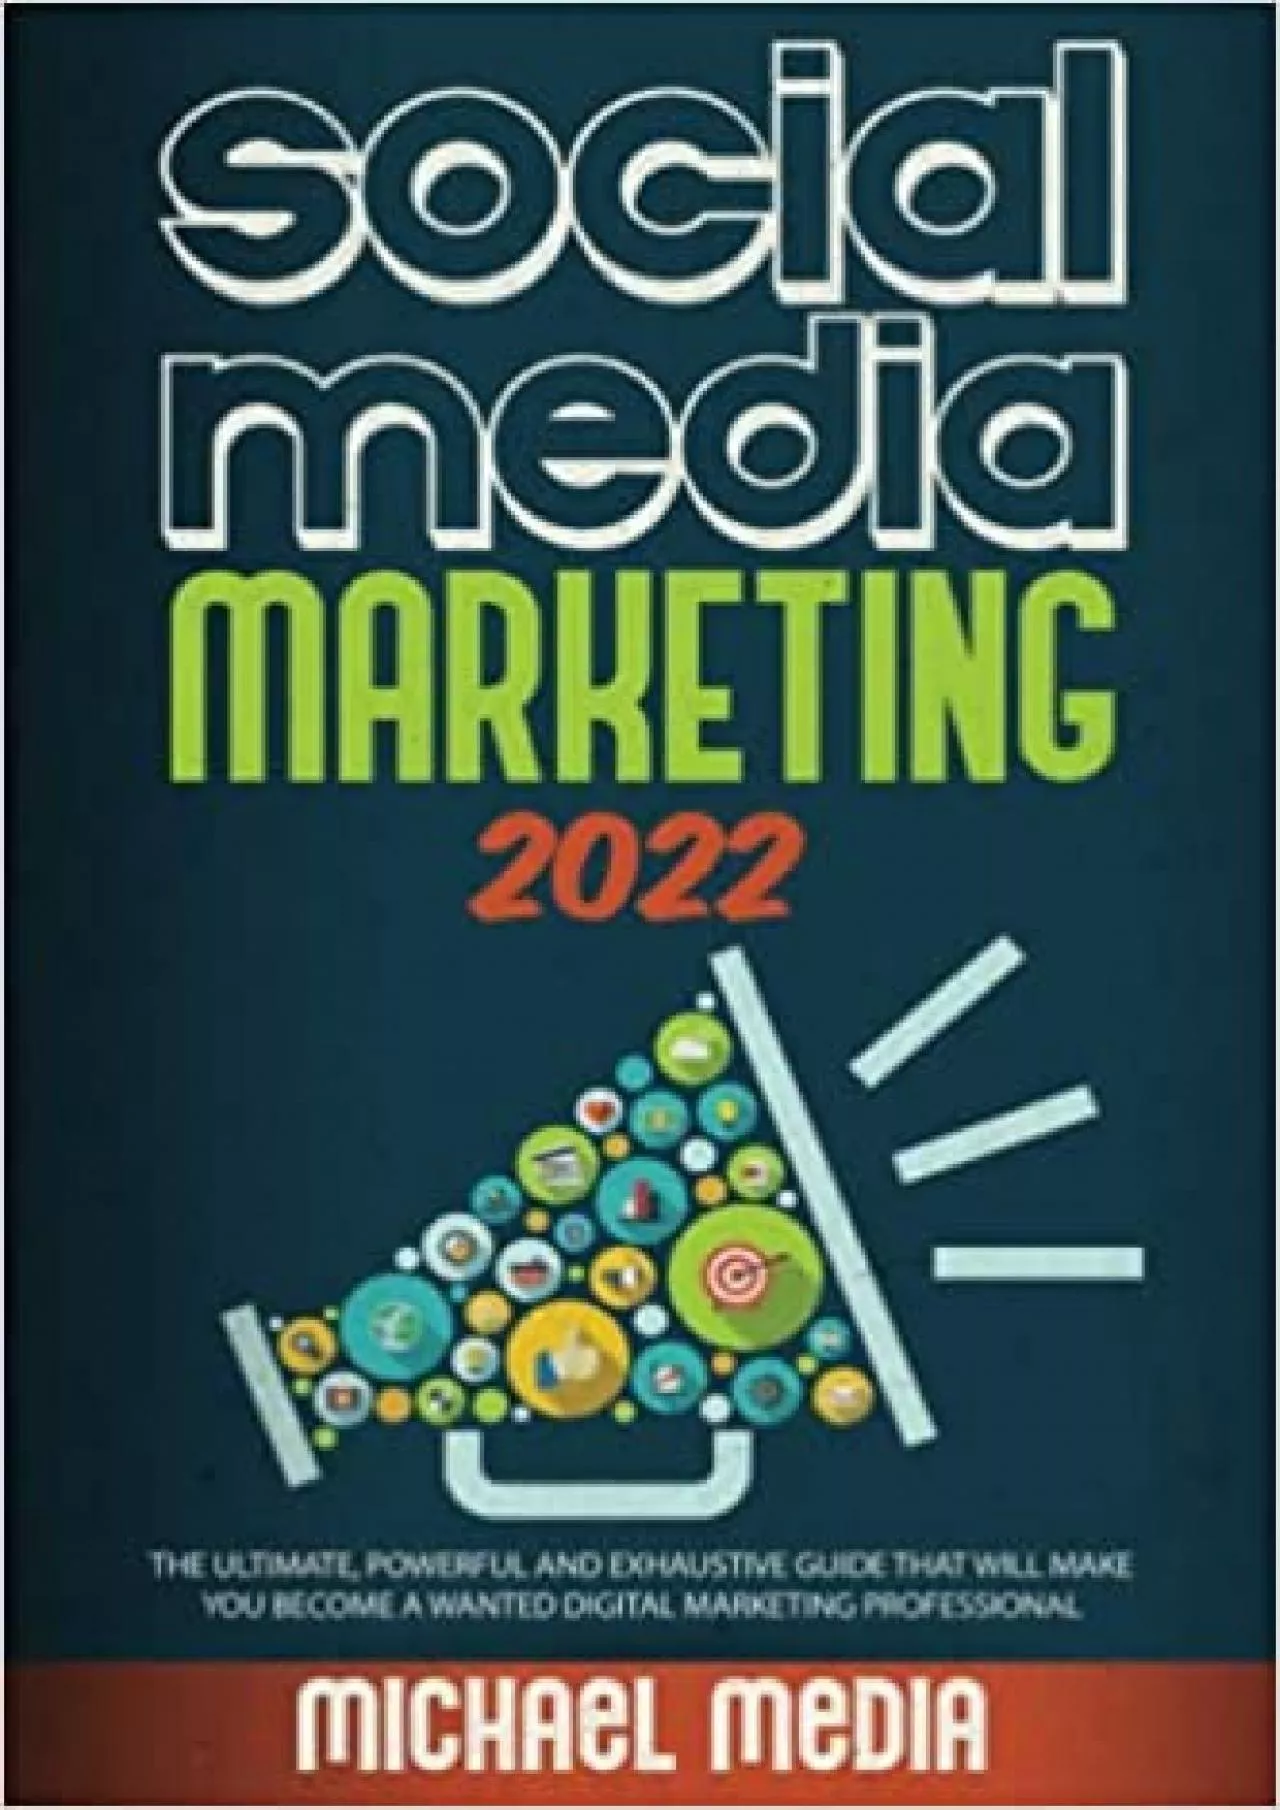 SOCIAL MEDIA MARKETING 2022 THE ULTIMATE POWERFUL AND EXHAUSTIVE GUIDE THAT WILL MAKE